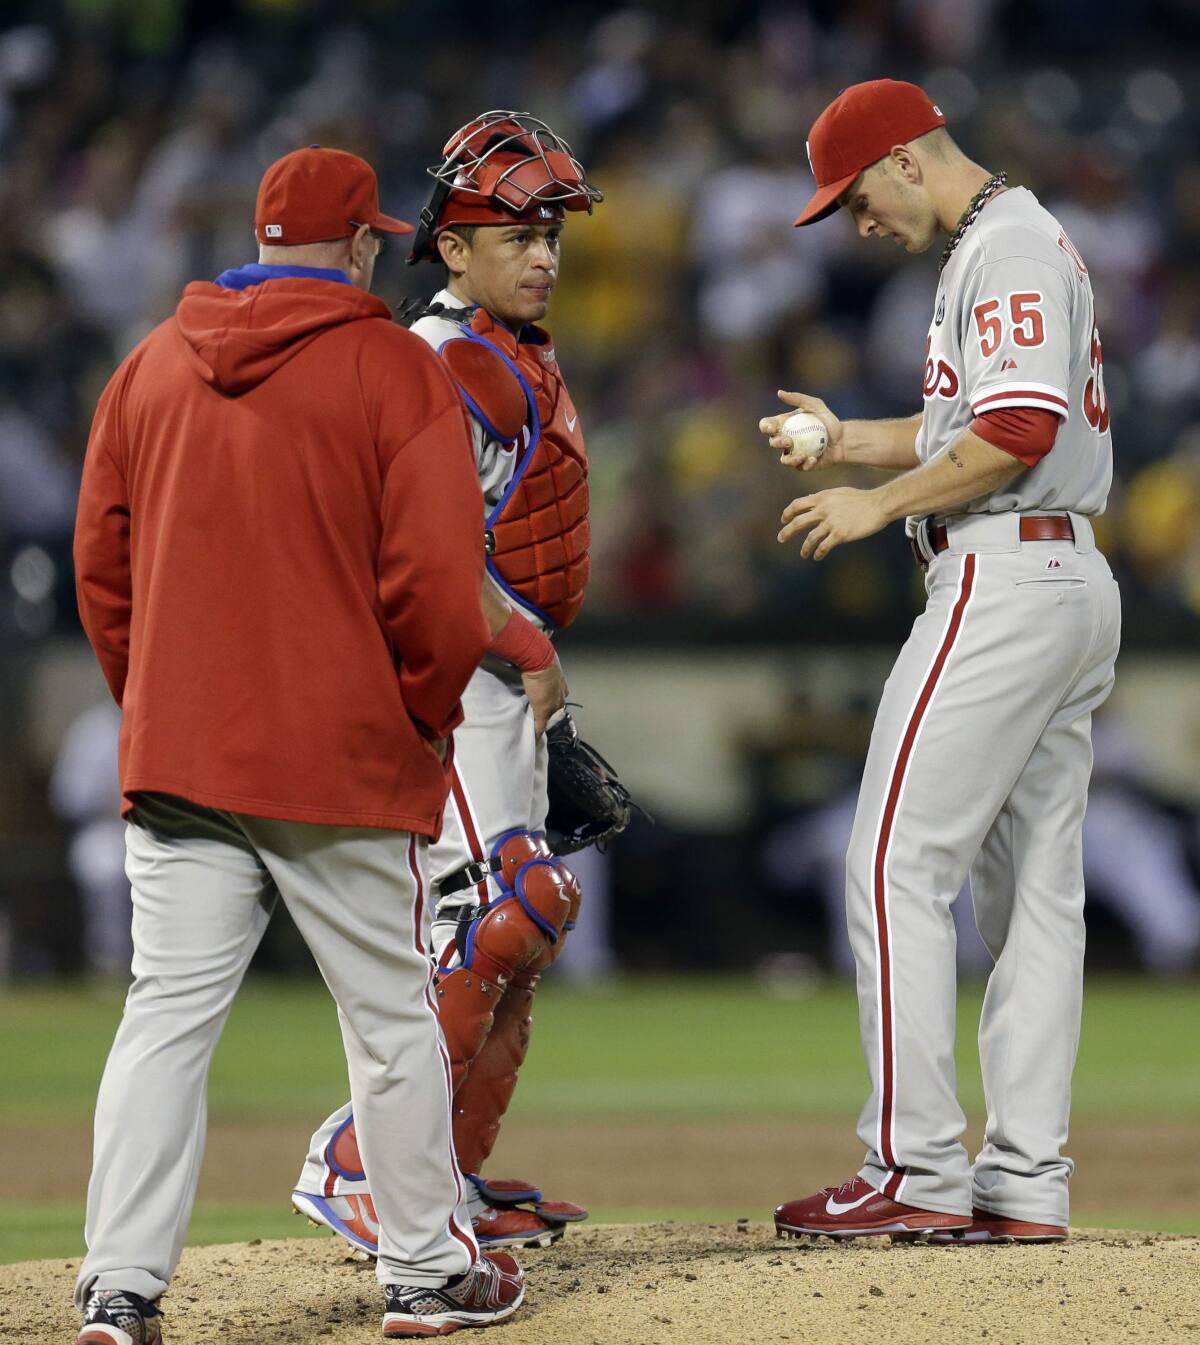 A's Jon Lester holds Phillies to 5 hits in 7 innings (w/video)